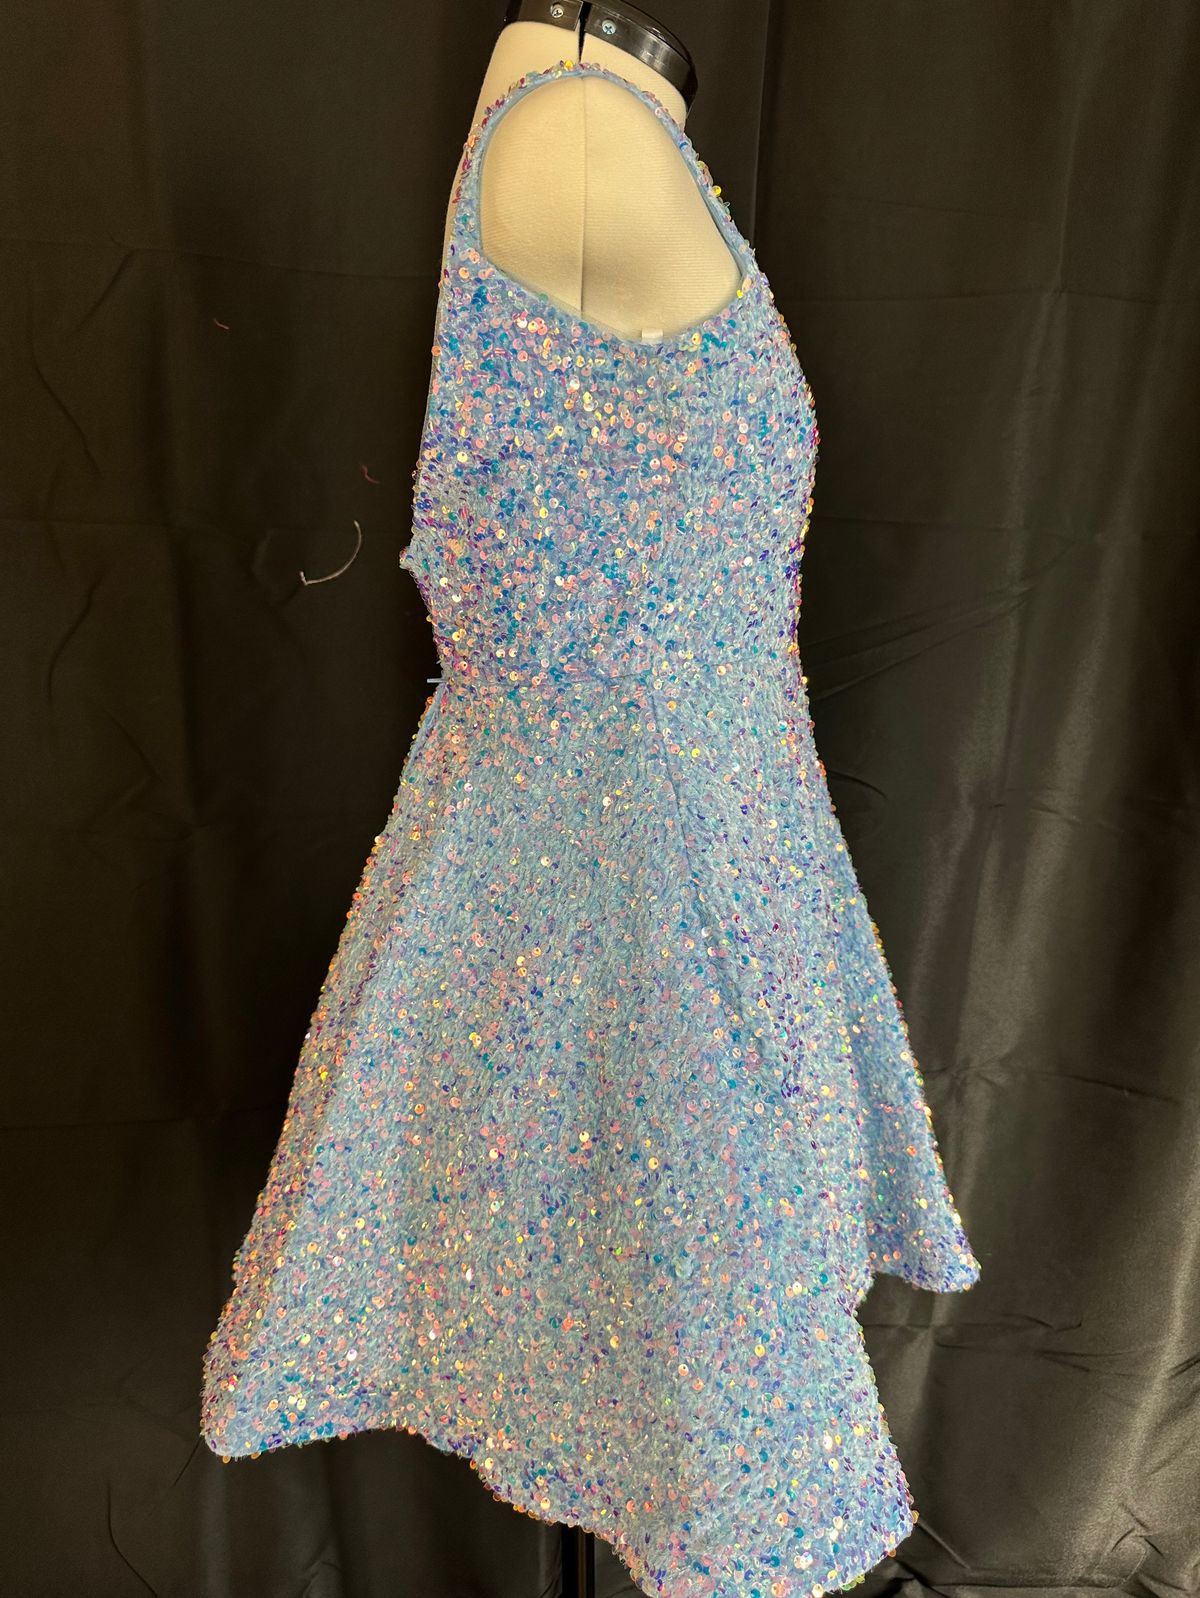 Style K55308 Sherri Hill Girls Size 14 Light Blue Cocktail Dress on Queenly